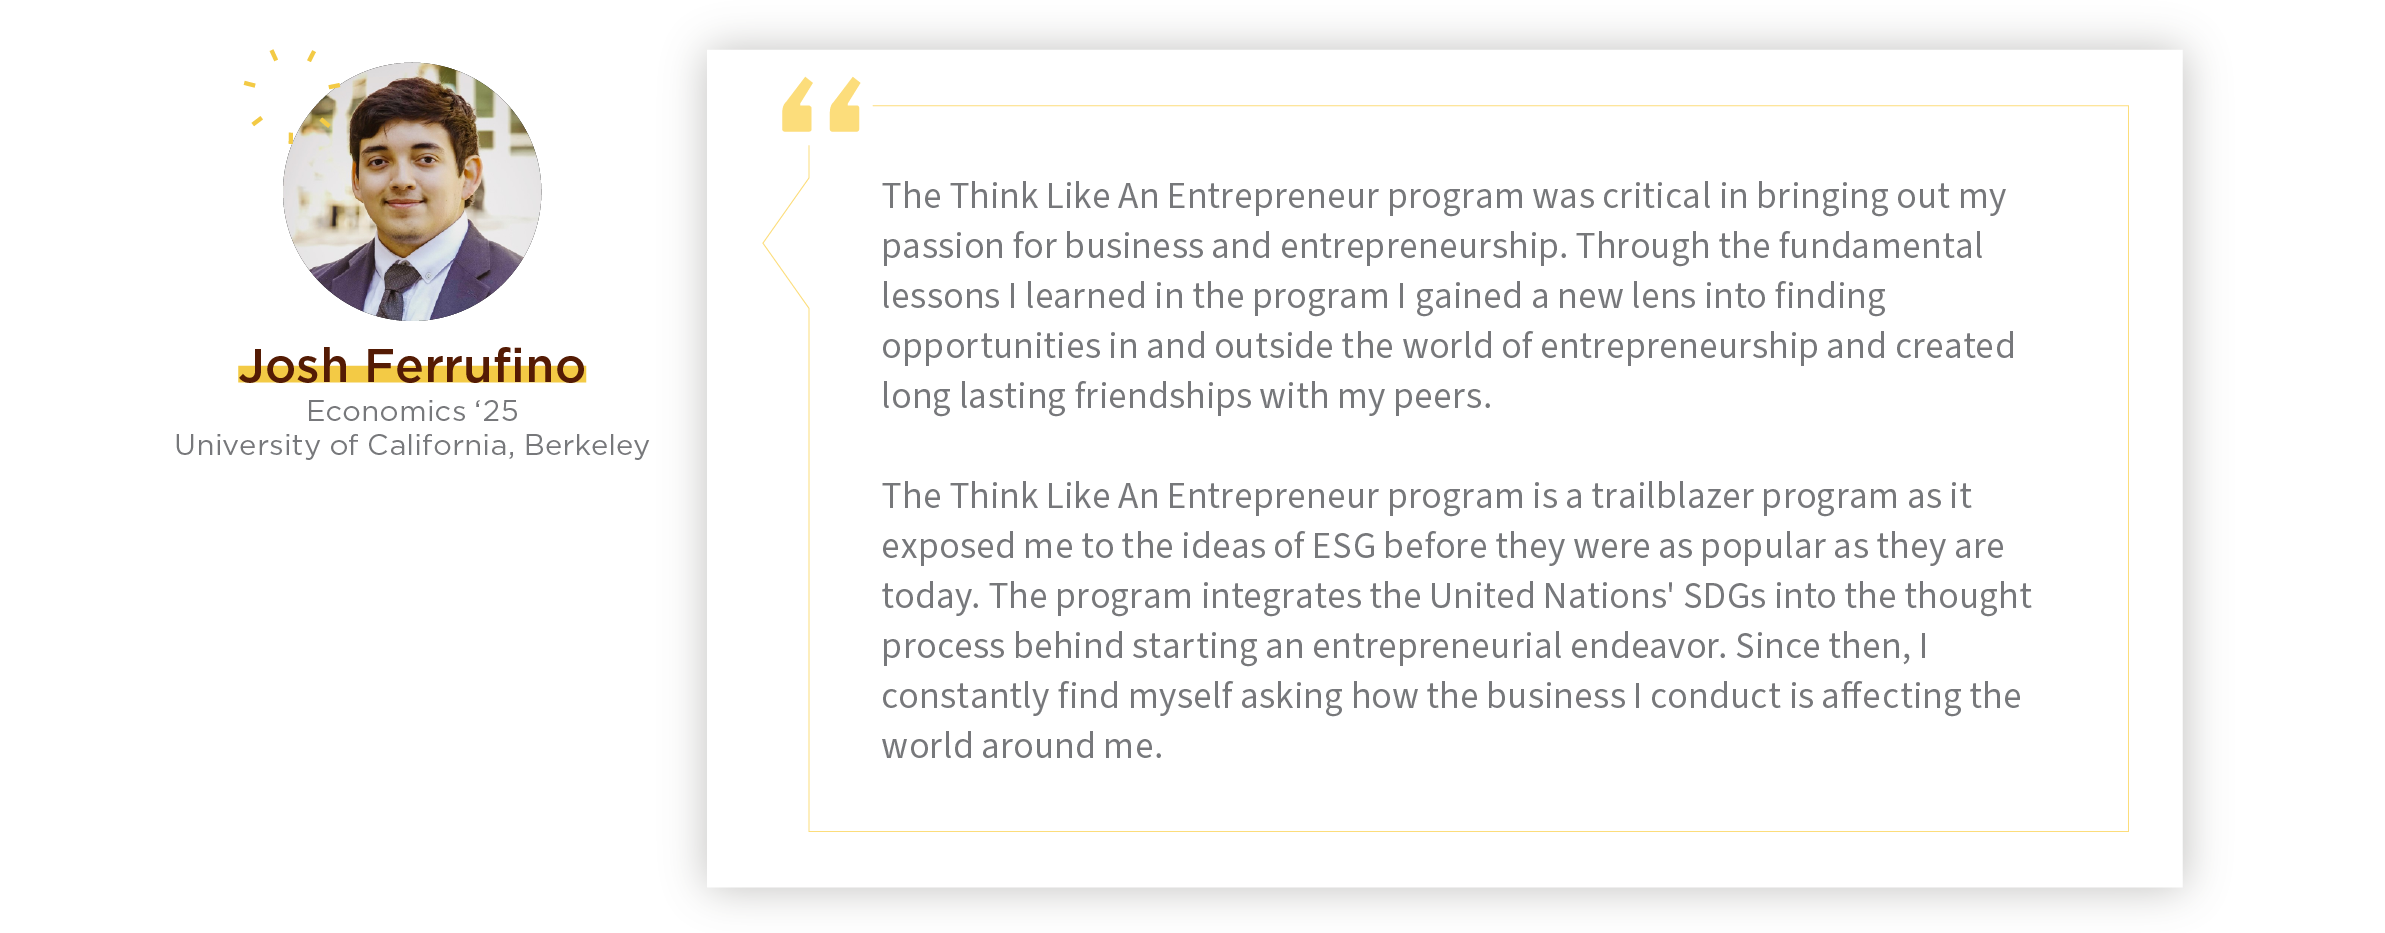 Quote: "The Think Like An Entrepreneur program was critical in bringing out my passion for business and entrepreneurship. Through the fundamental lessons I learned in the program I gained a new lens into finding opportunities in and outside the world of entrepreneurship and created long lasting friendships with my peers.    The Think Like An Entrepreneur program is a trailblazer program as it exposed me to the ideas of ESG before they were as popular as they are today. The program integrates the United Nations' SDGs into the thought process behind starting an entrepreneurial endeavor. Since then, I constantly find myself asking how the business I conduct is affecting the world around me." - Josh Ferrufino, program alum